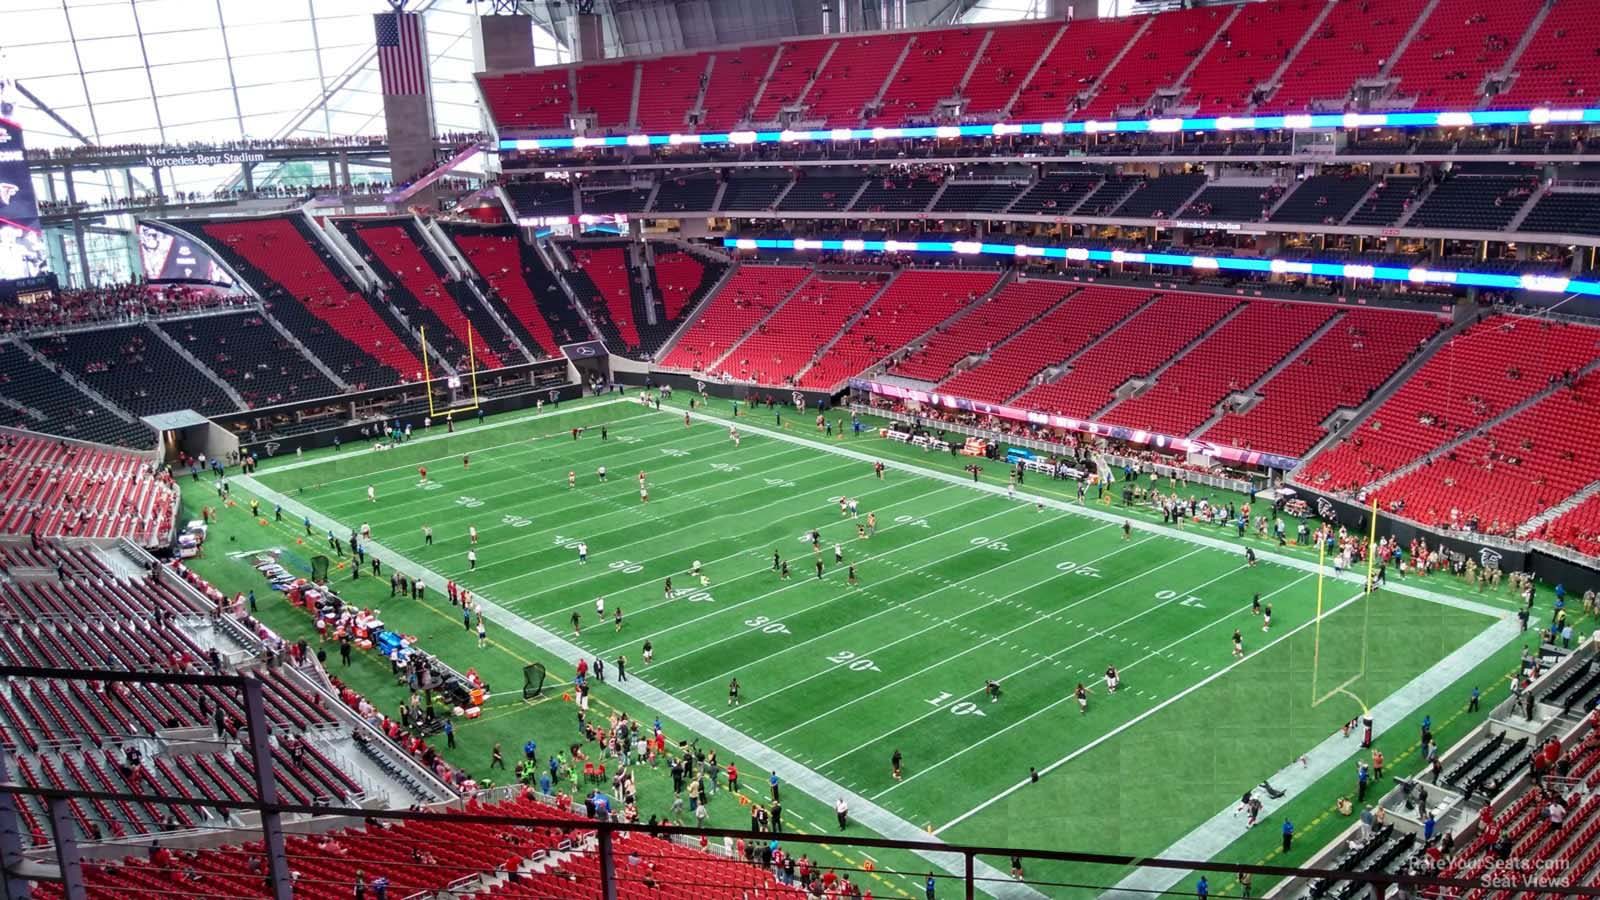 section 332, row 4 seat view  for football - mercedes-benz stadium